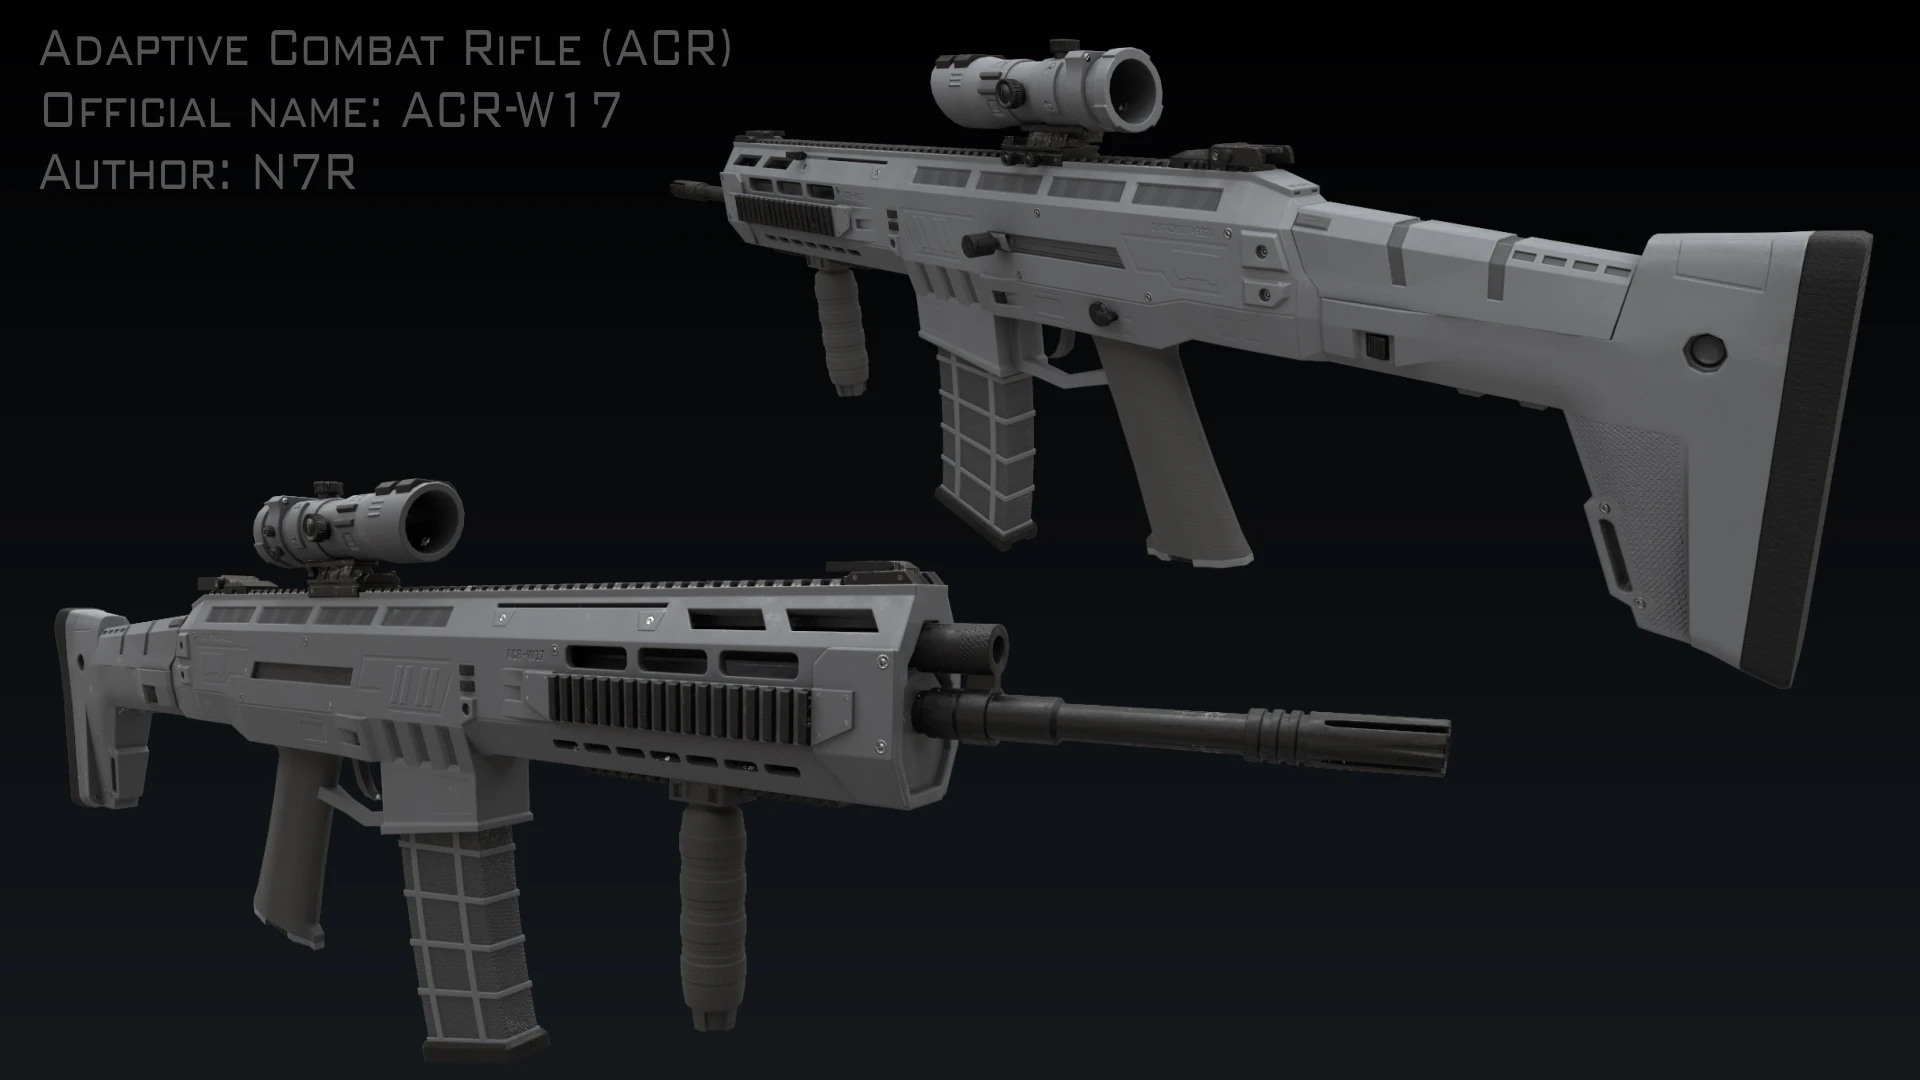 Fictional variant based off the Adaptive Combat Rifle.